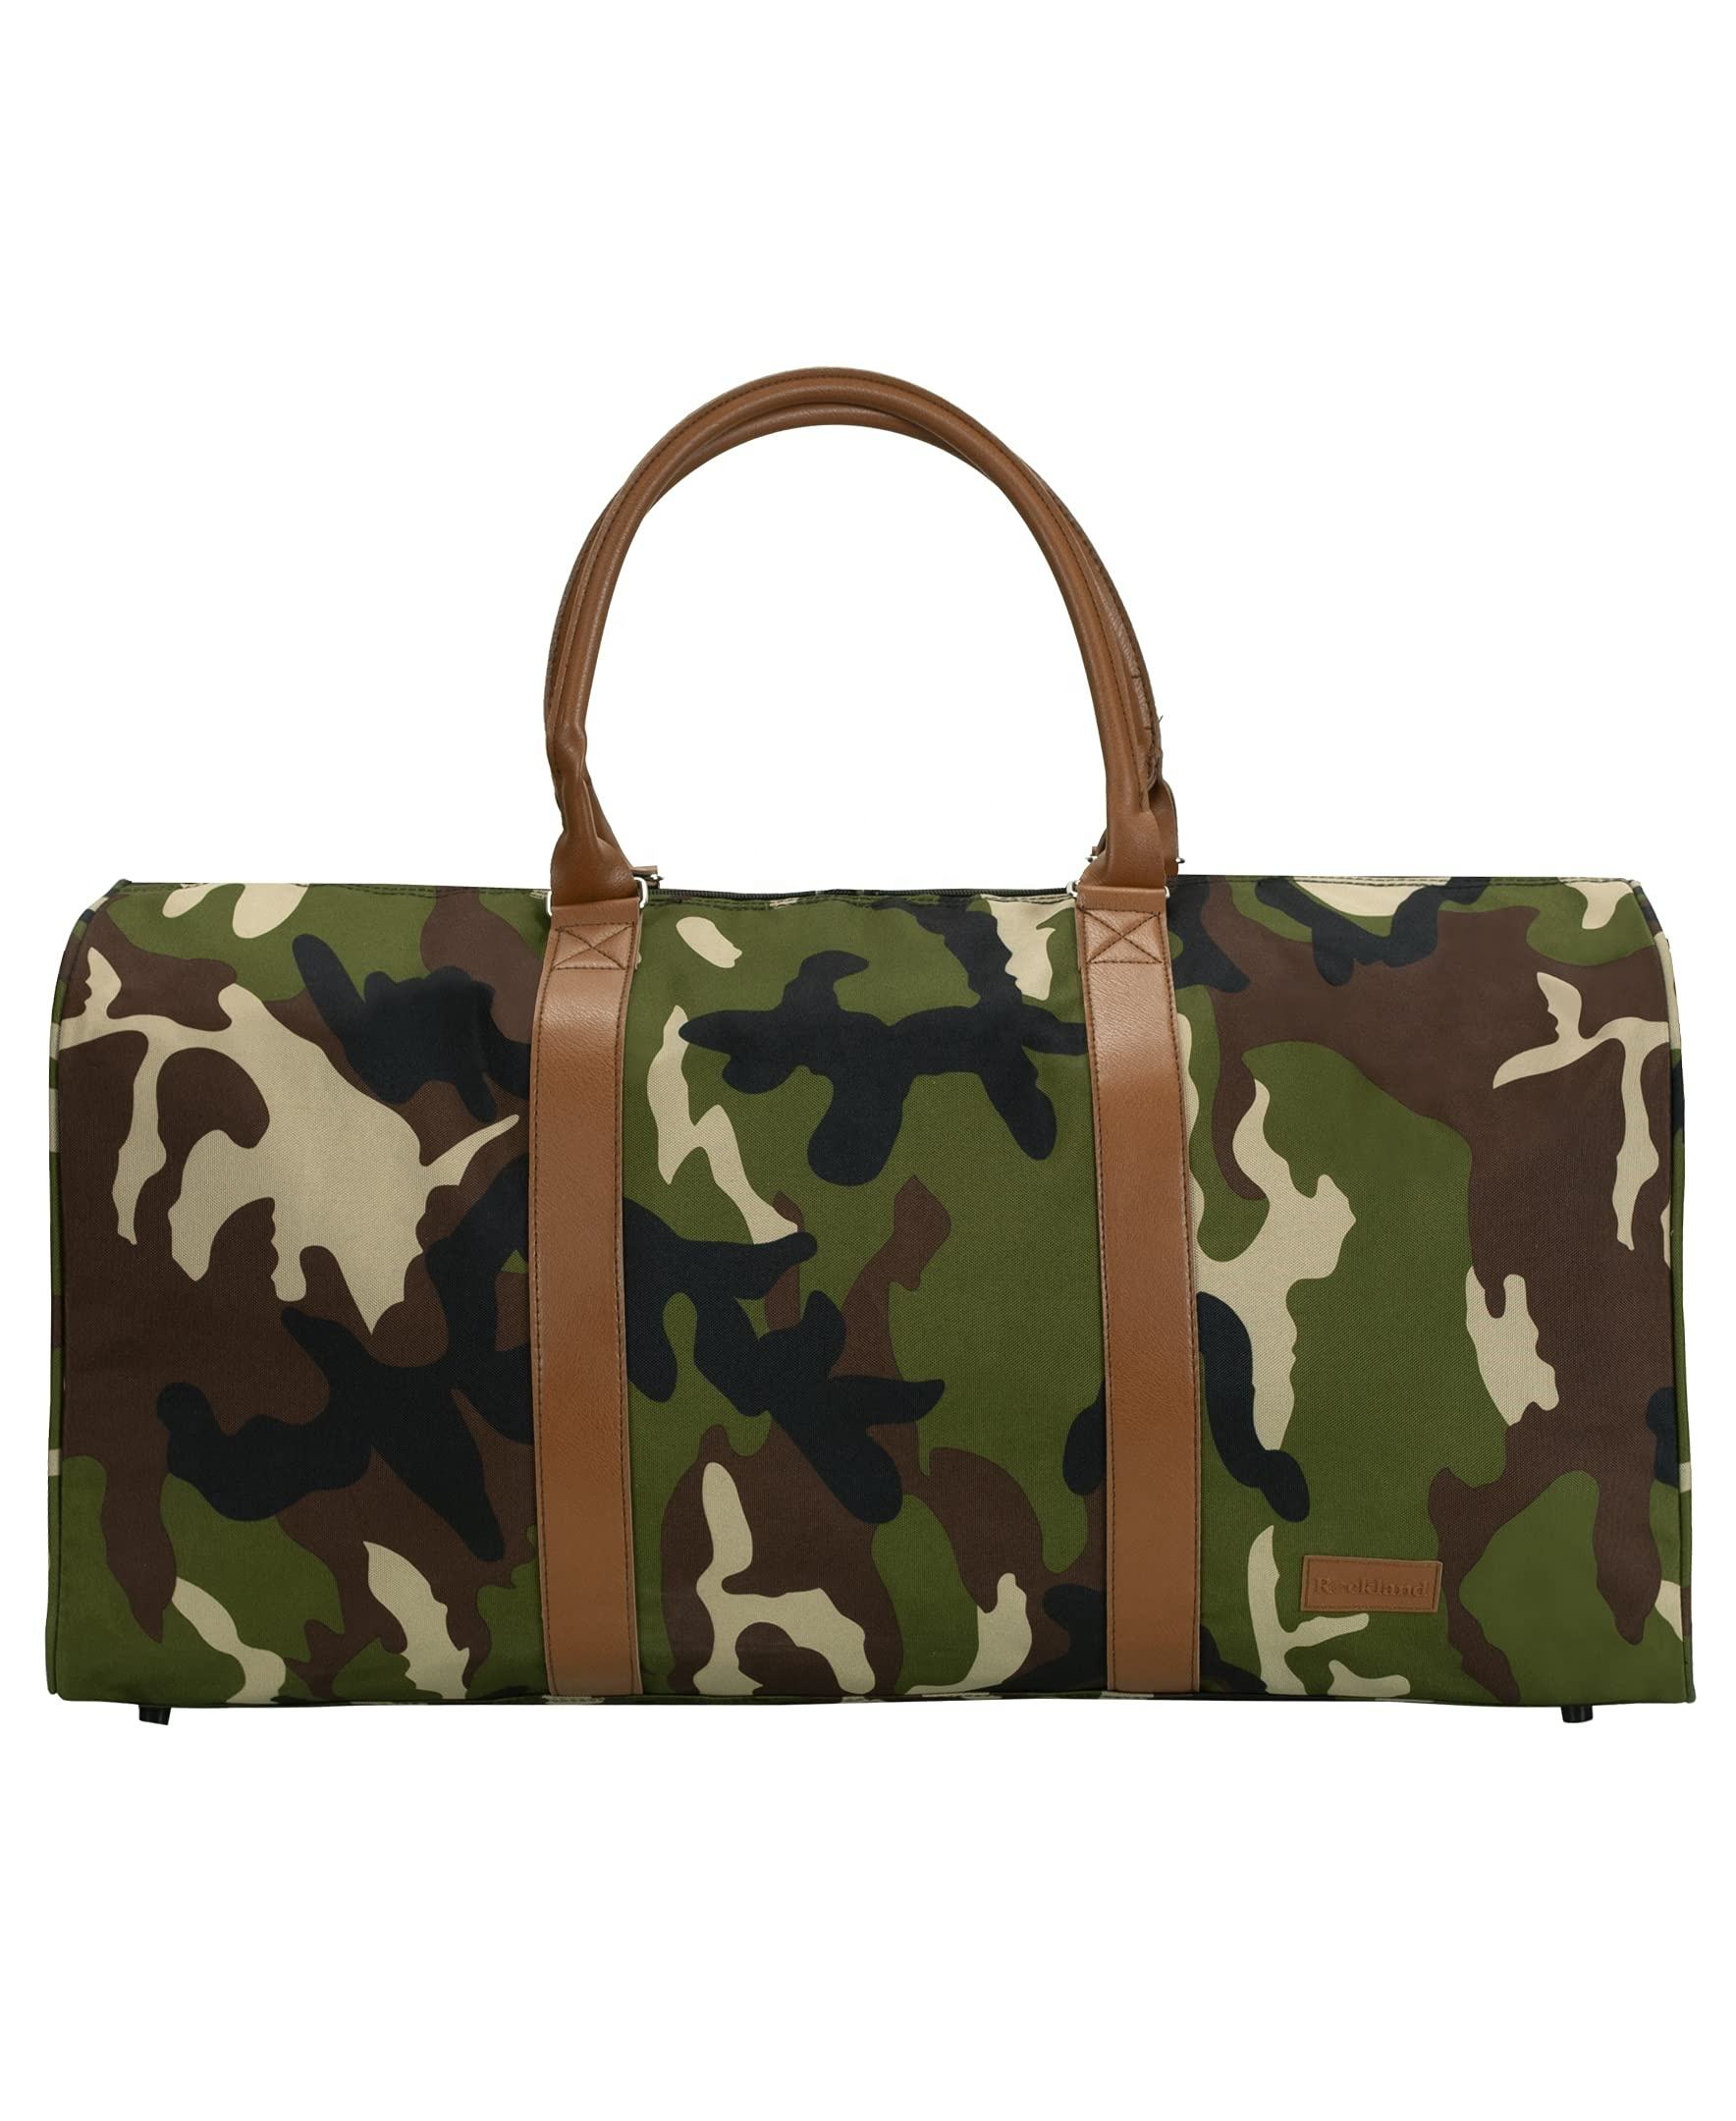 Promotion Portable Camouflage Custom Logo Gym Sports Yoga Tote Duffle Bag mit Schuhfach Outdoor Sports Side Bag